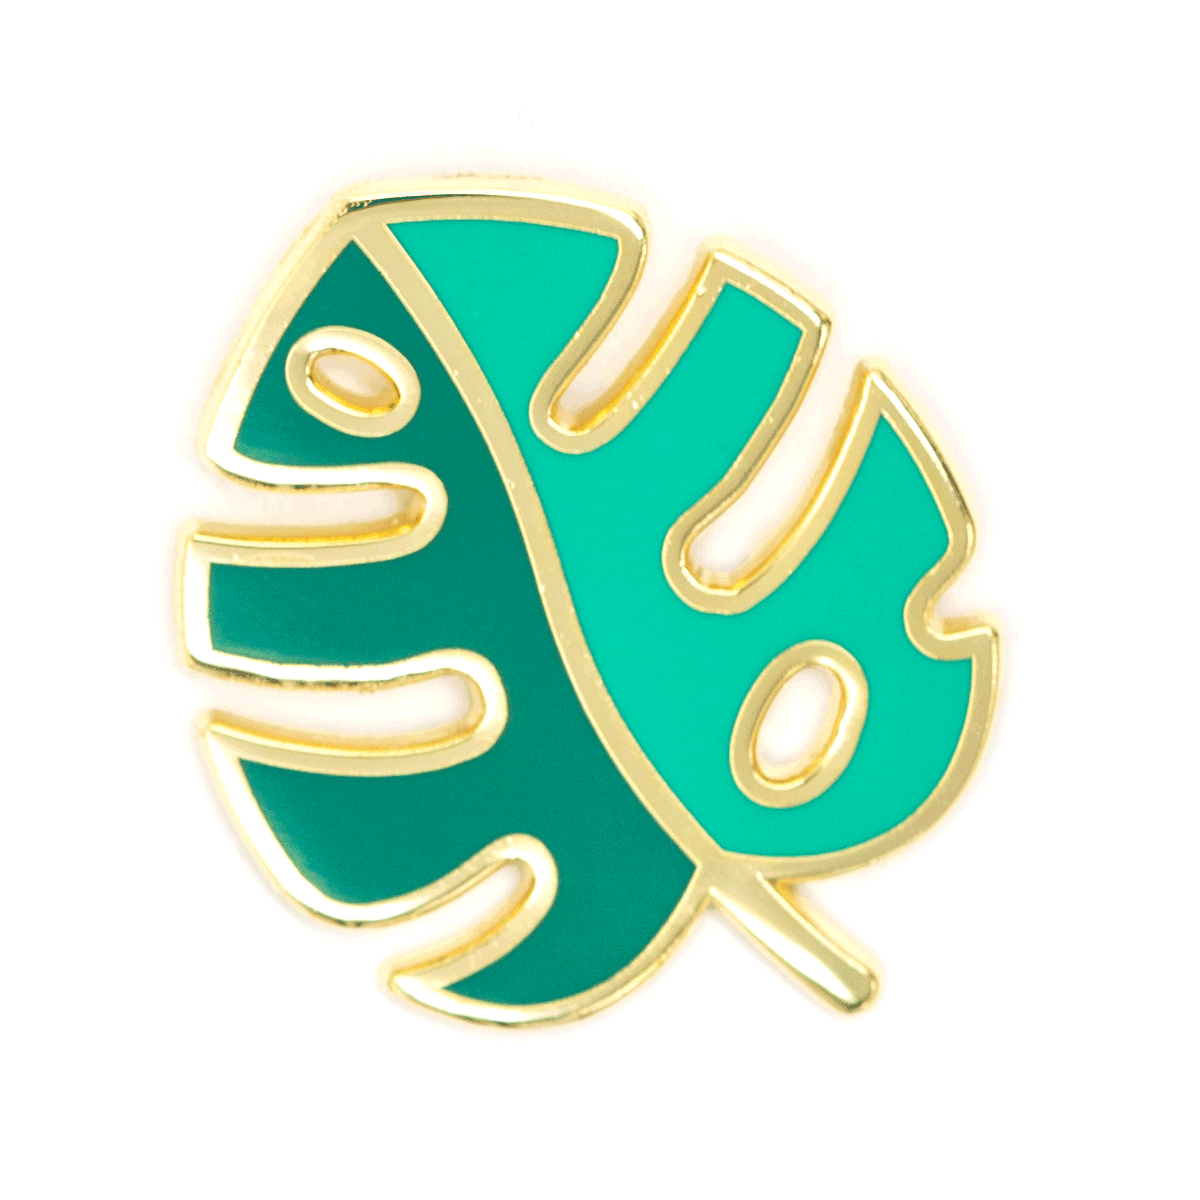 These Are Things - Monstera Leaf Enamel Pin